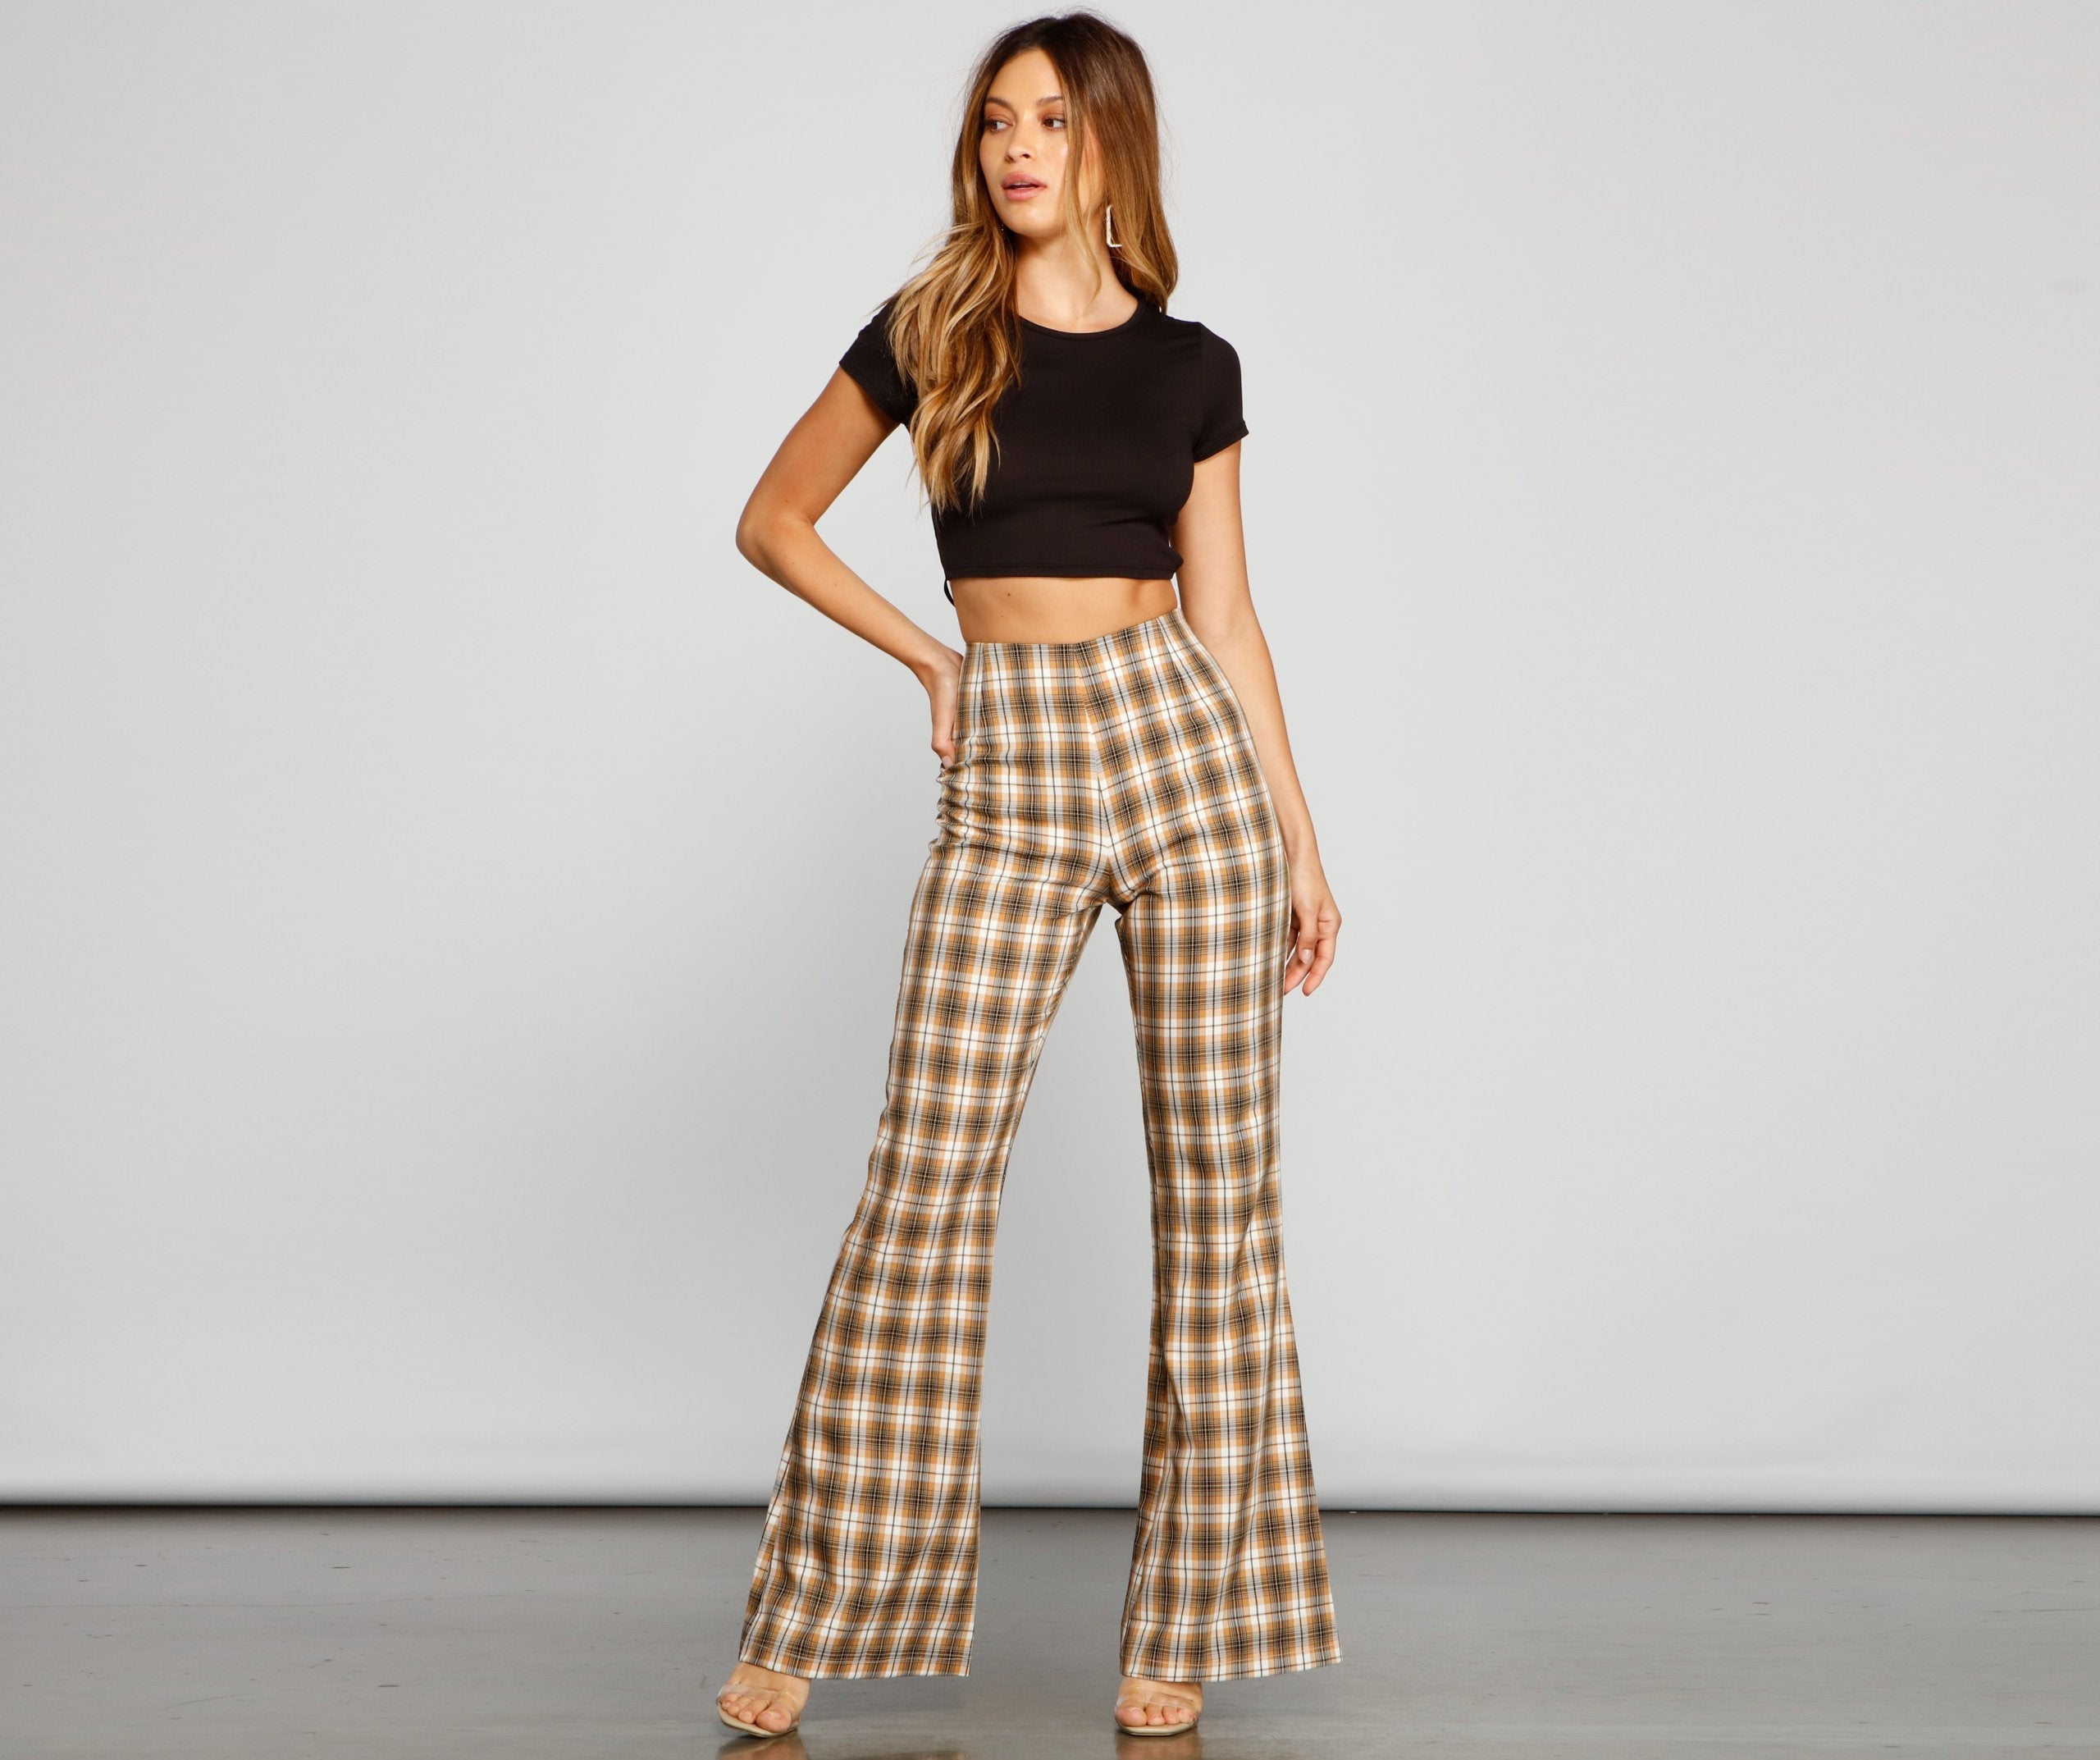 Bring The Flare Plaid Pants